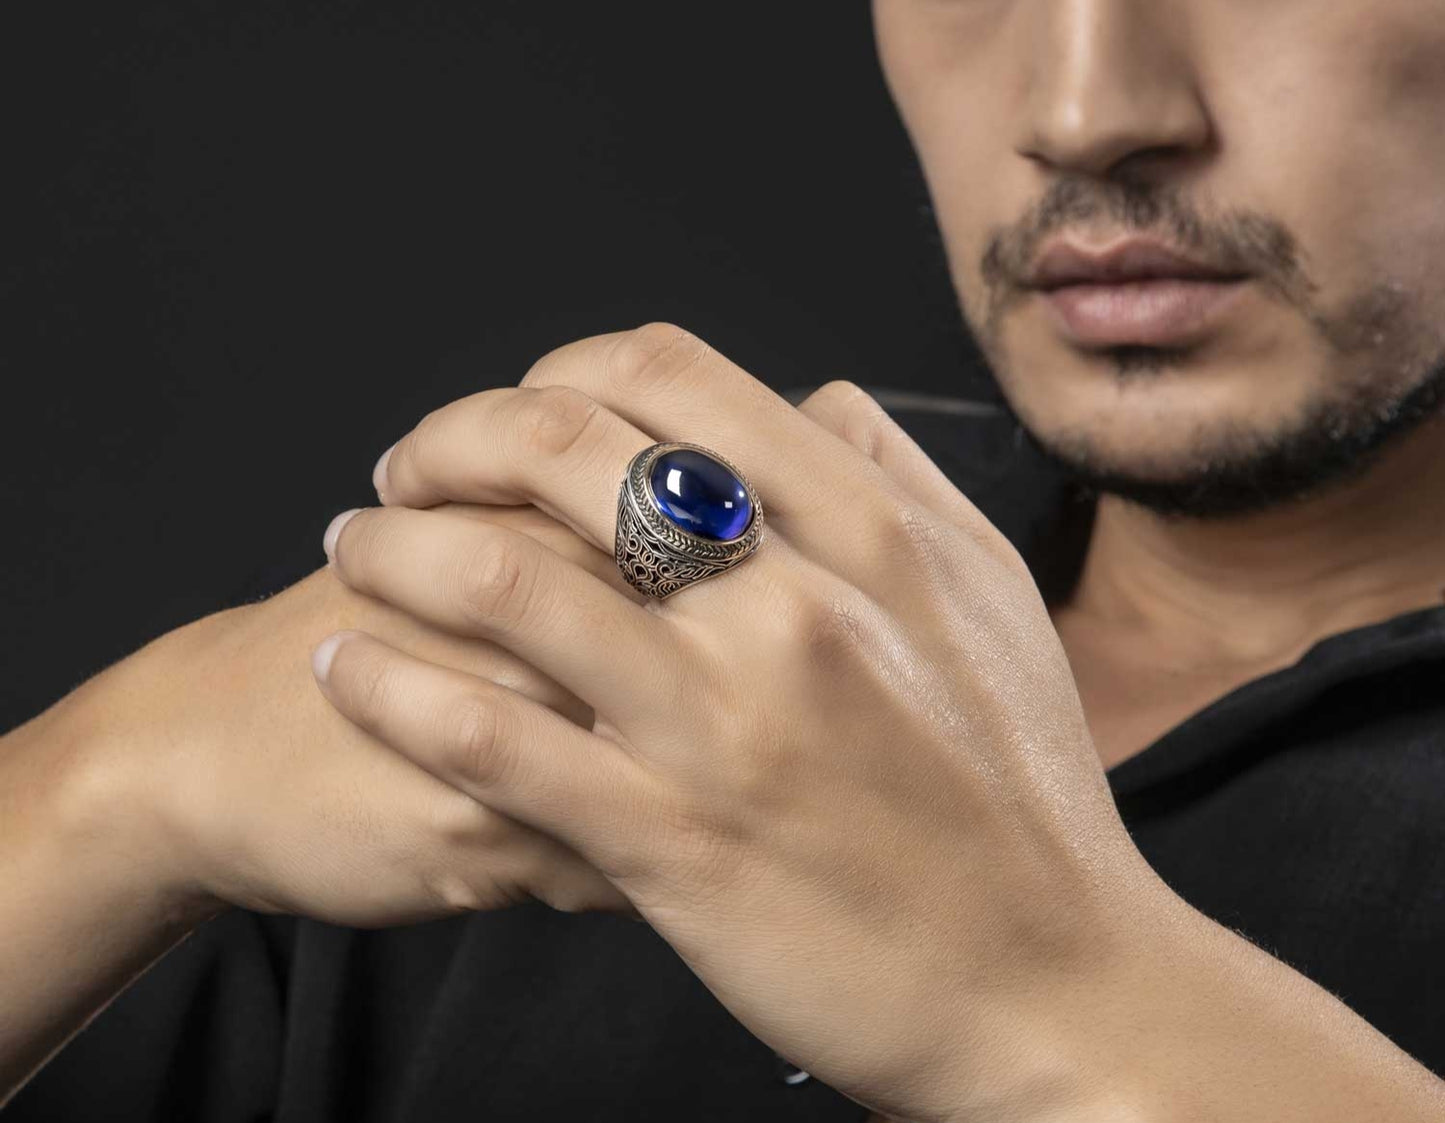 RARE PRINCE by CARAT SUTRA | Unique Turkish Style Ring with Blue S Sapphire | 925 Sterling Silver Oxidized Ring | Men's Jewelry | With Certificate of Authenticity and 925 Hallmark - caratsutra